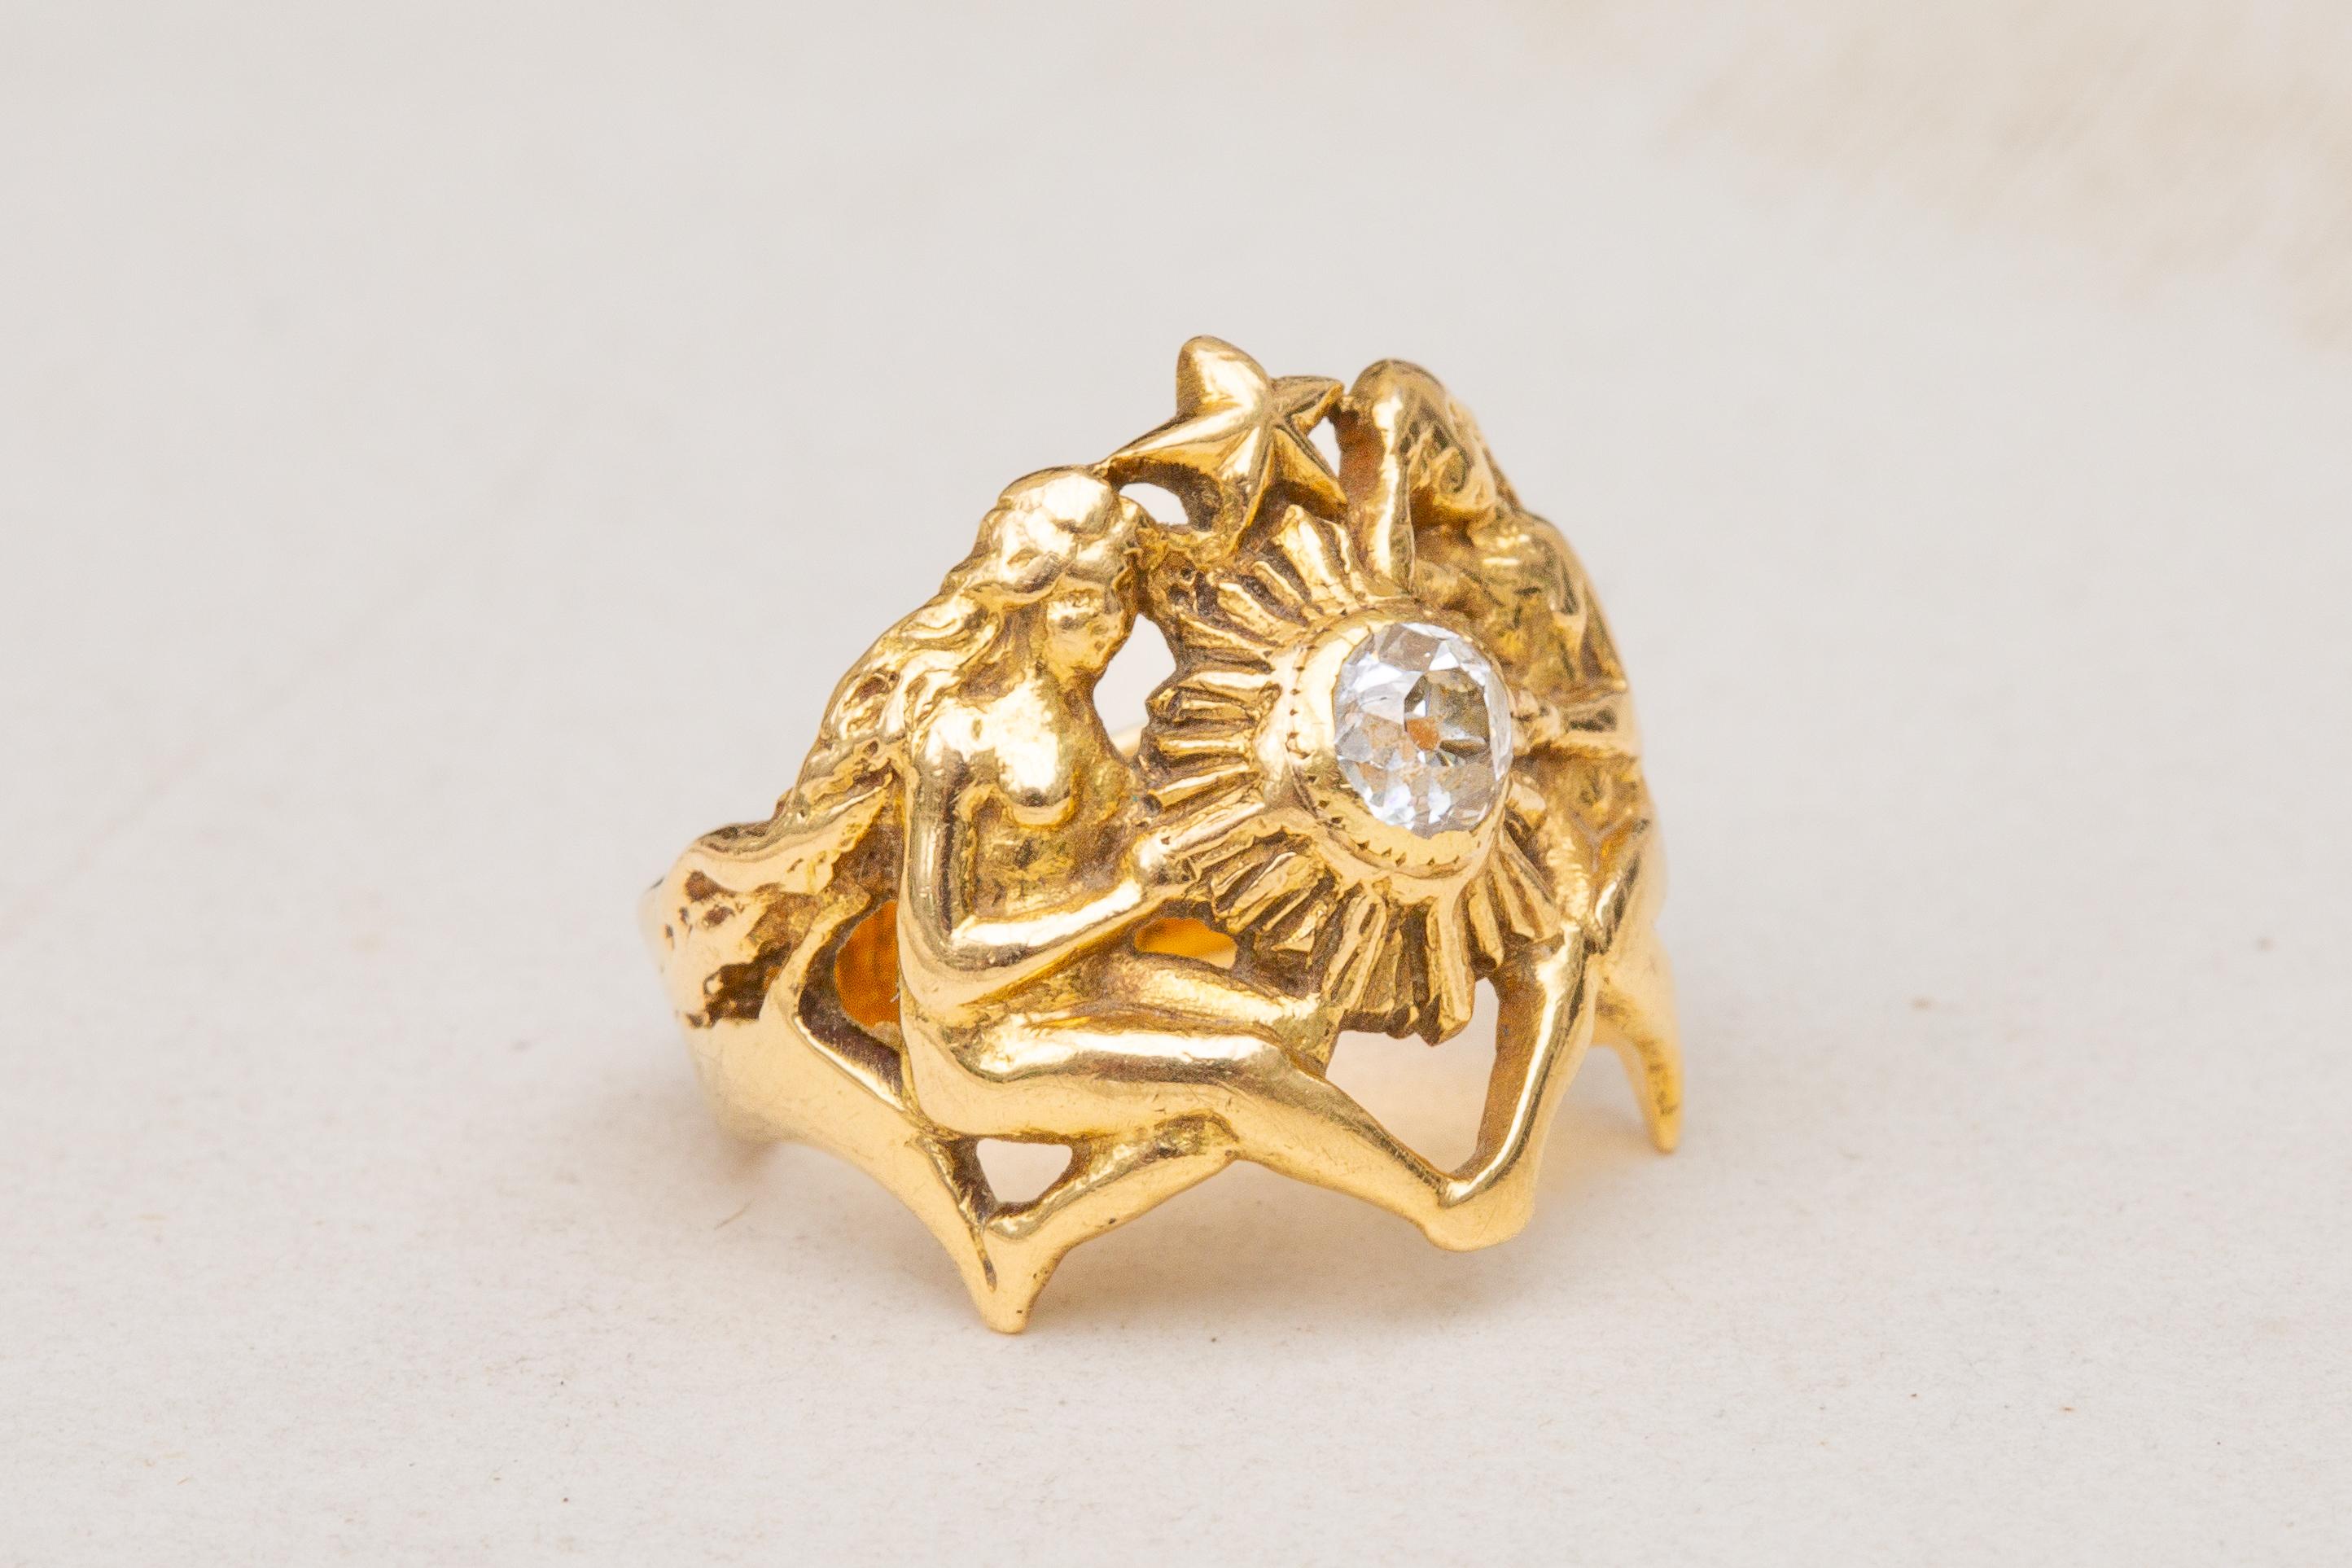 French Antique Heavy 18K Gold Ethereal Figural 0.35ct Old European Cut Diamond 7